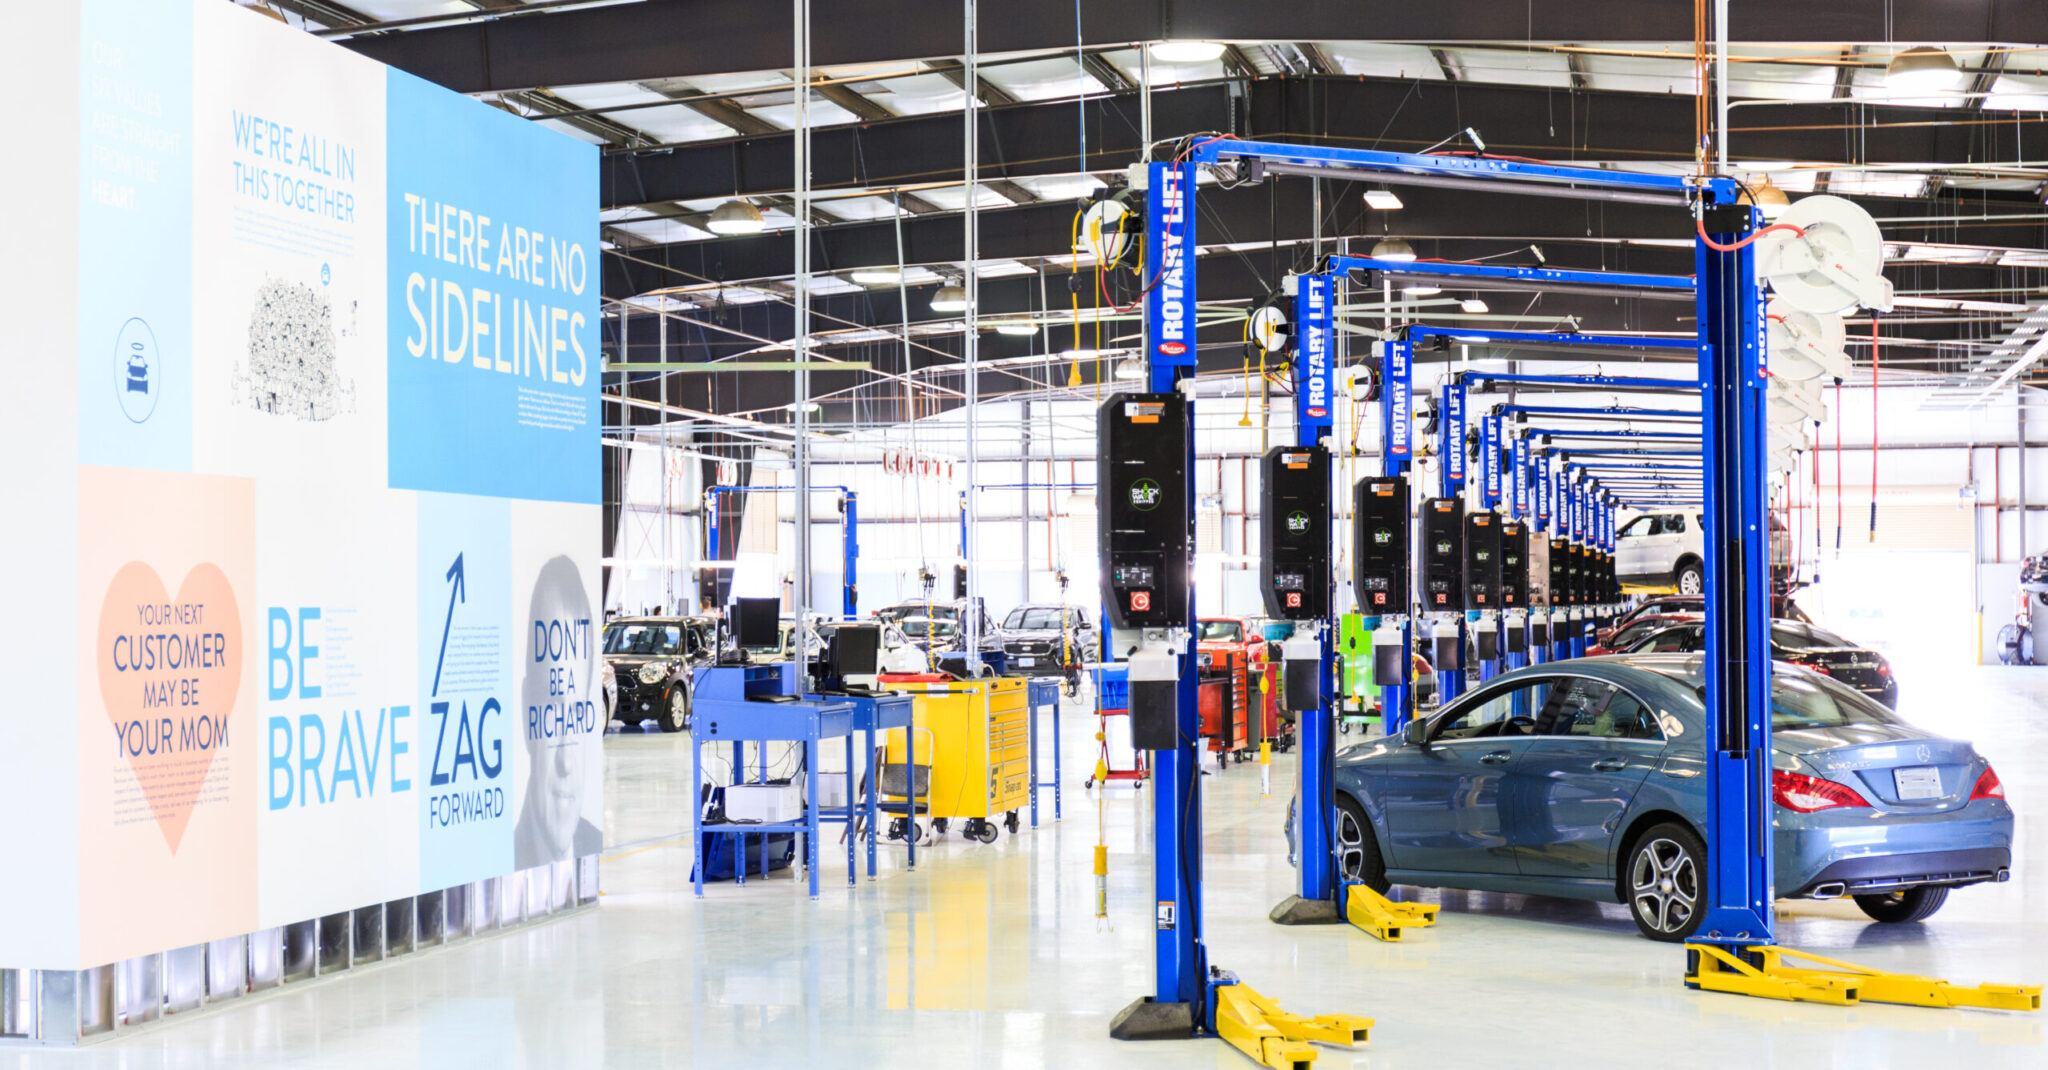 Carvana looking to fill 165 Bham positions at Bessemer hiring event —Dec. 1-2. The details.